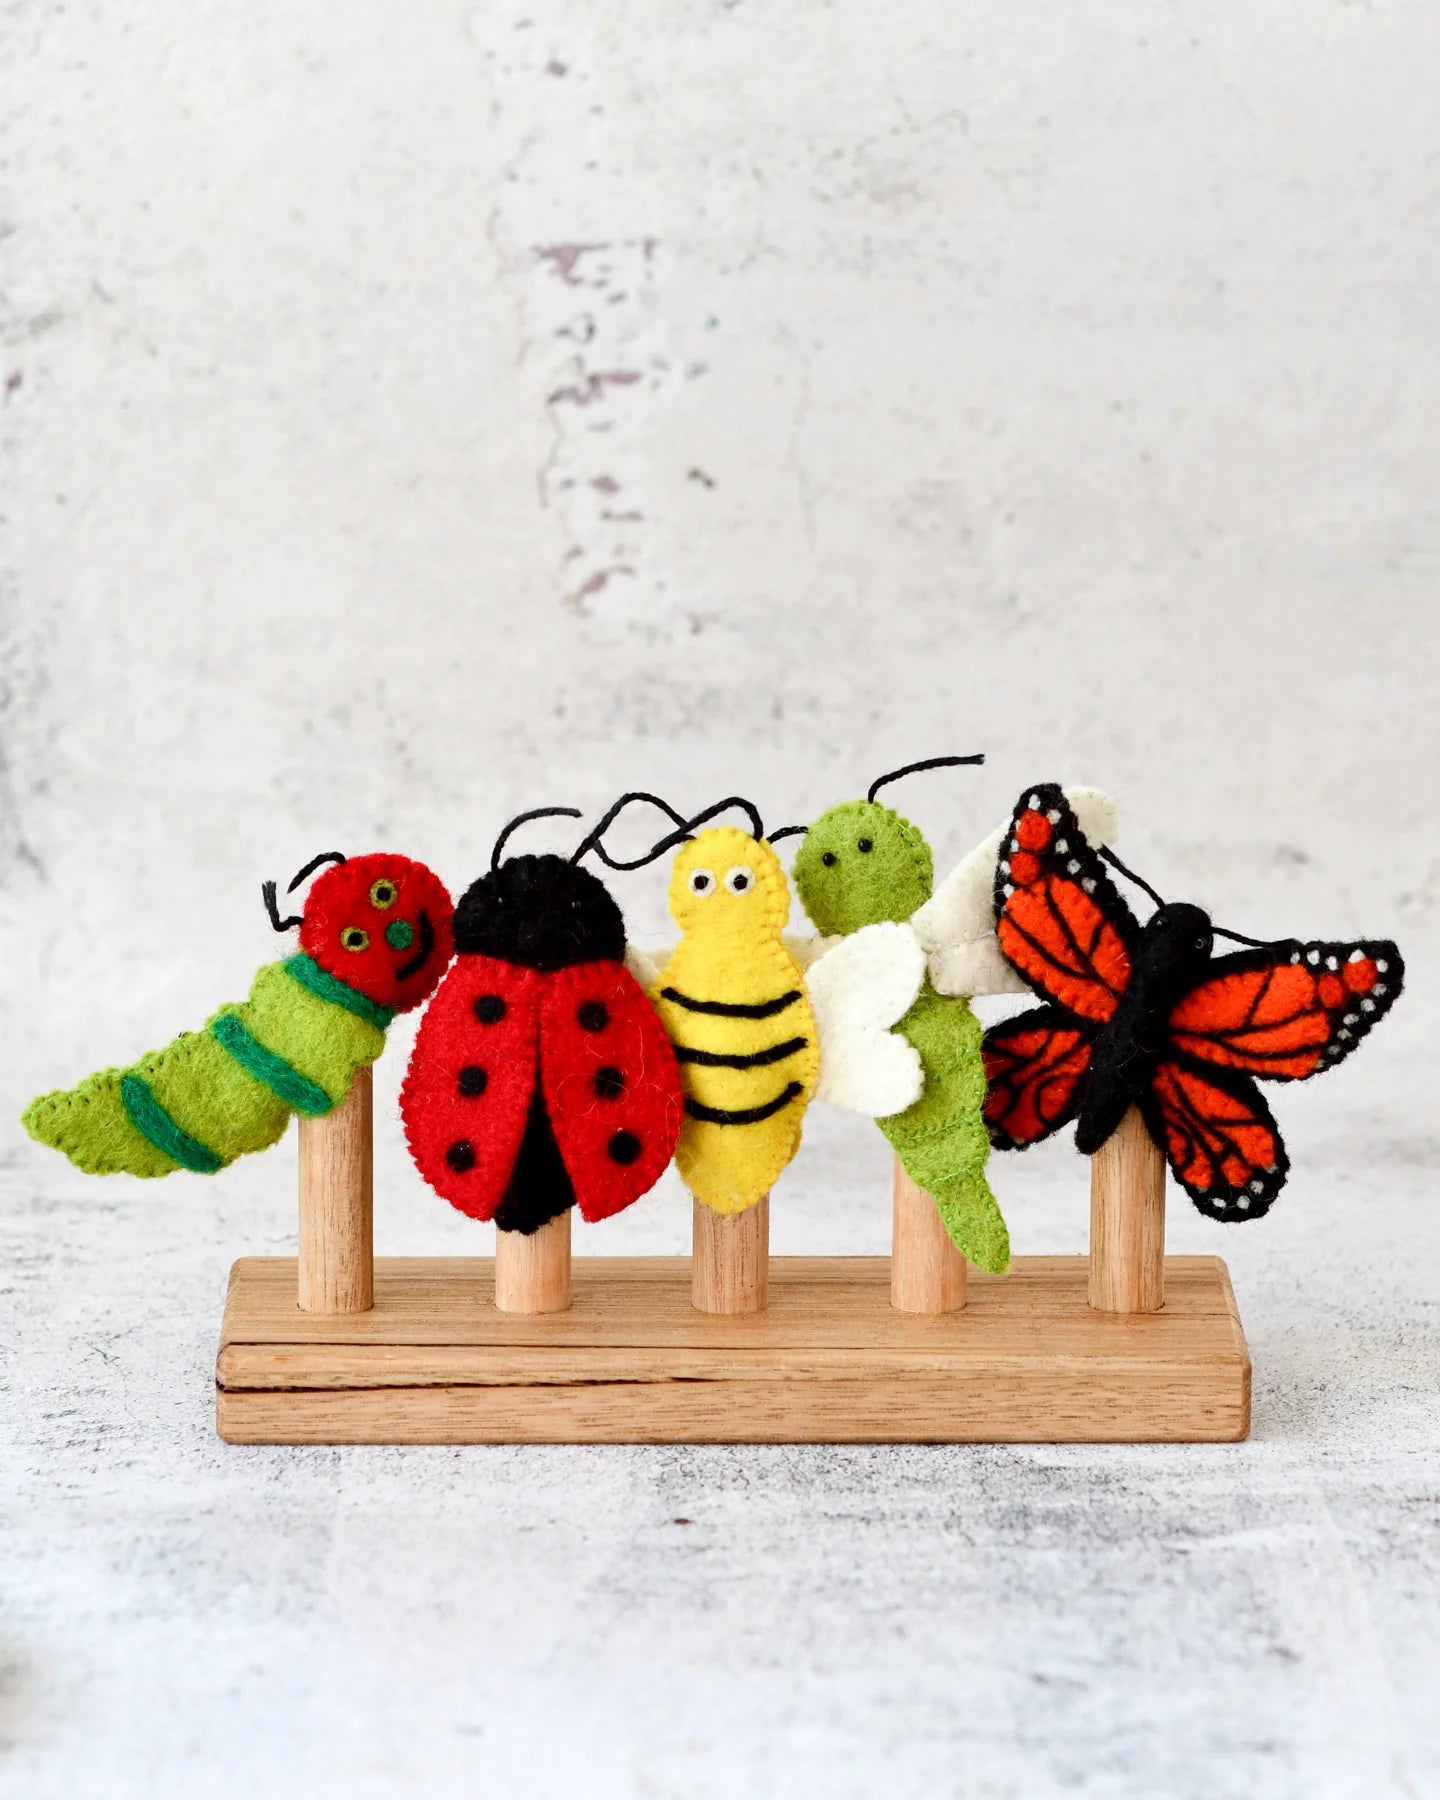 Tara Treasures Felt Insects and Bugs Finger Puppet Set